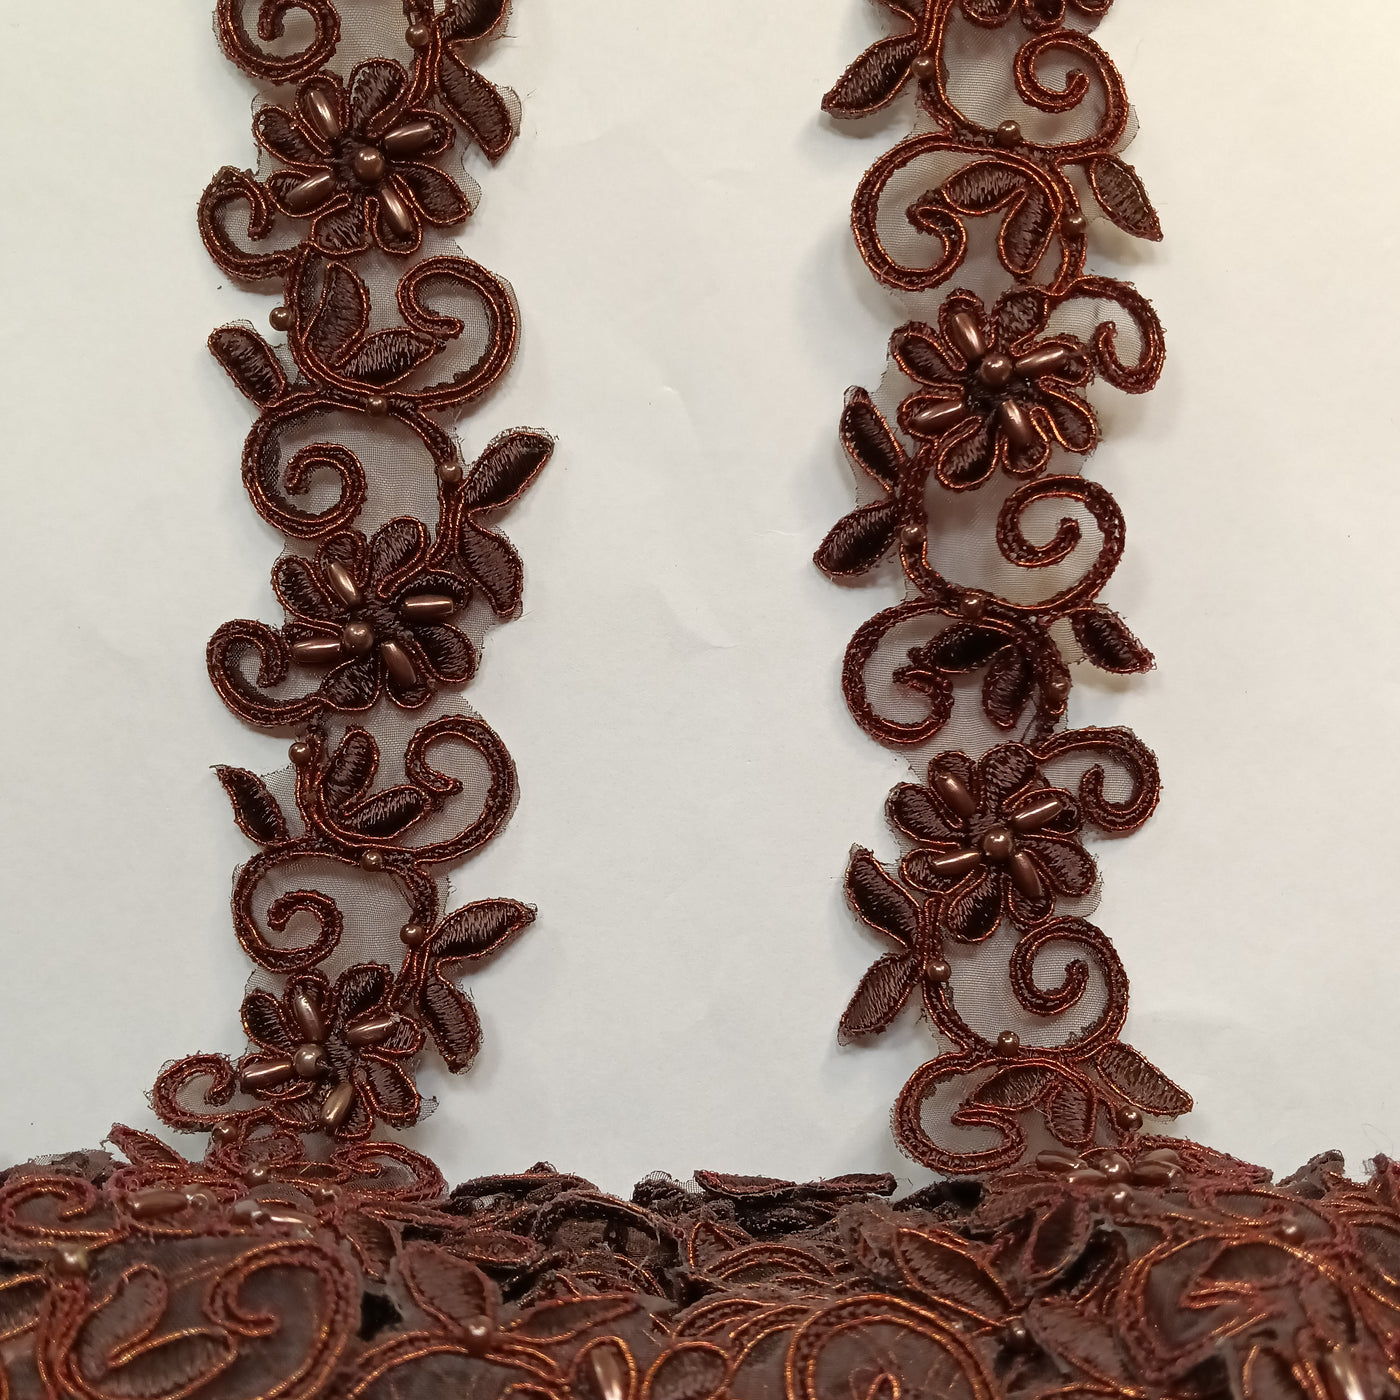 Beaded, Corded & Embroidered Metallic Brown Trimming. Lace Usa